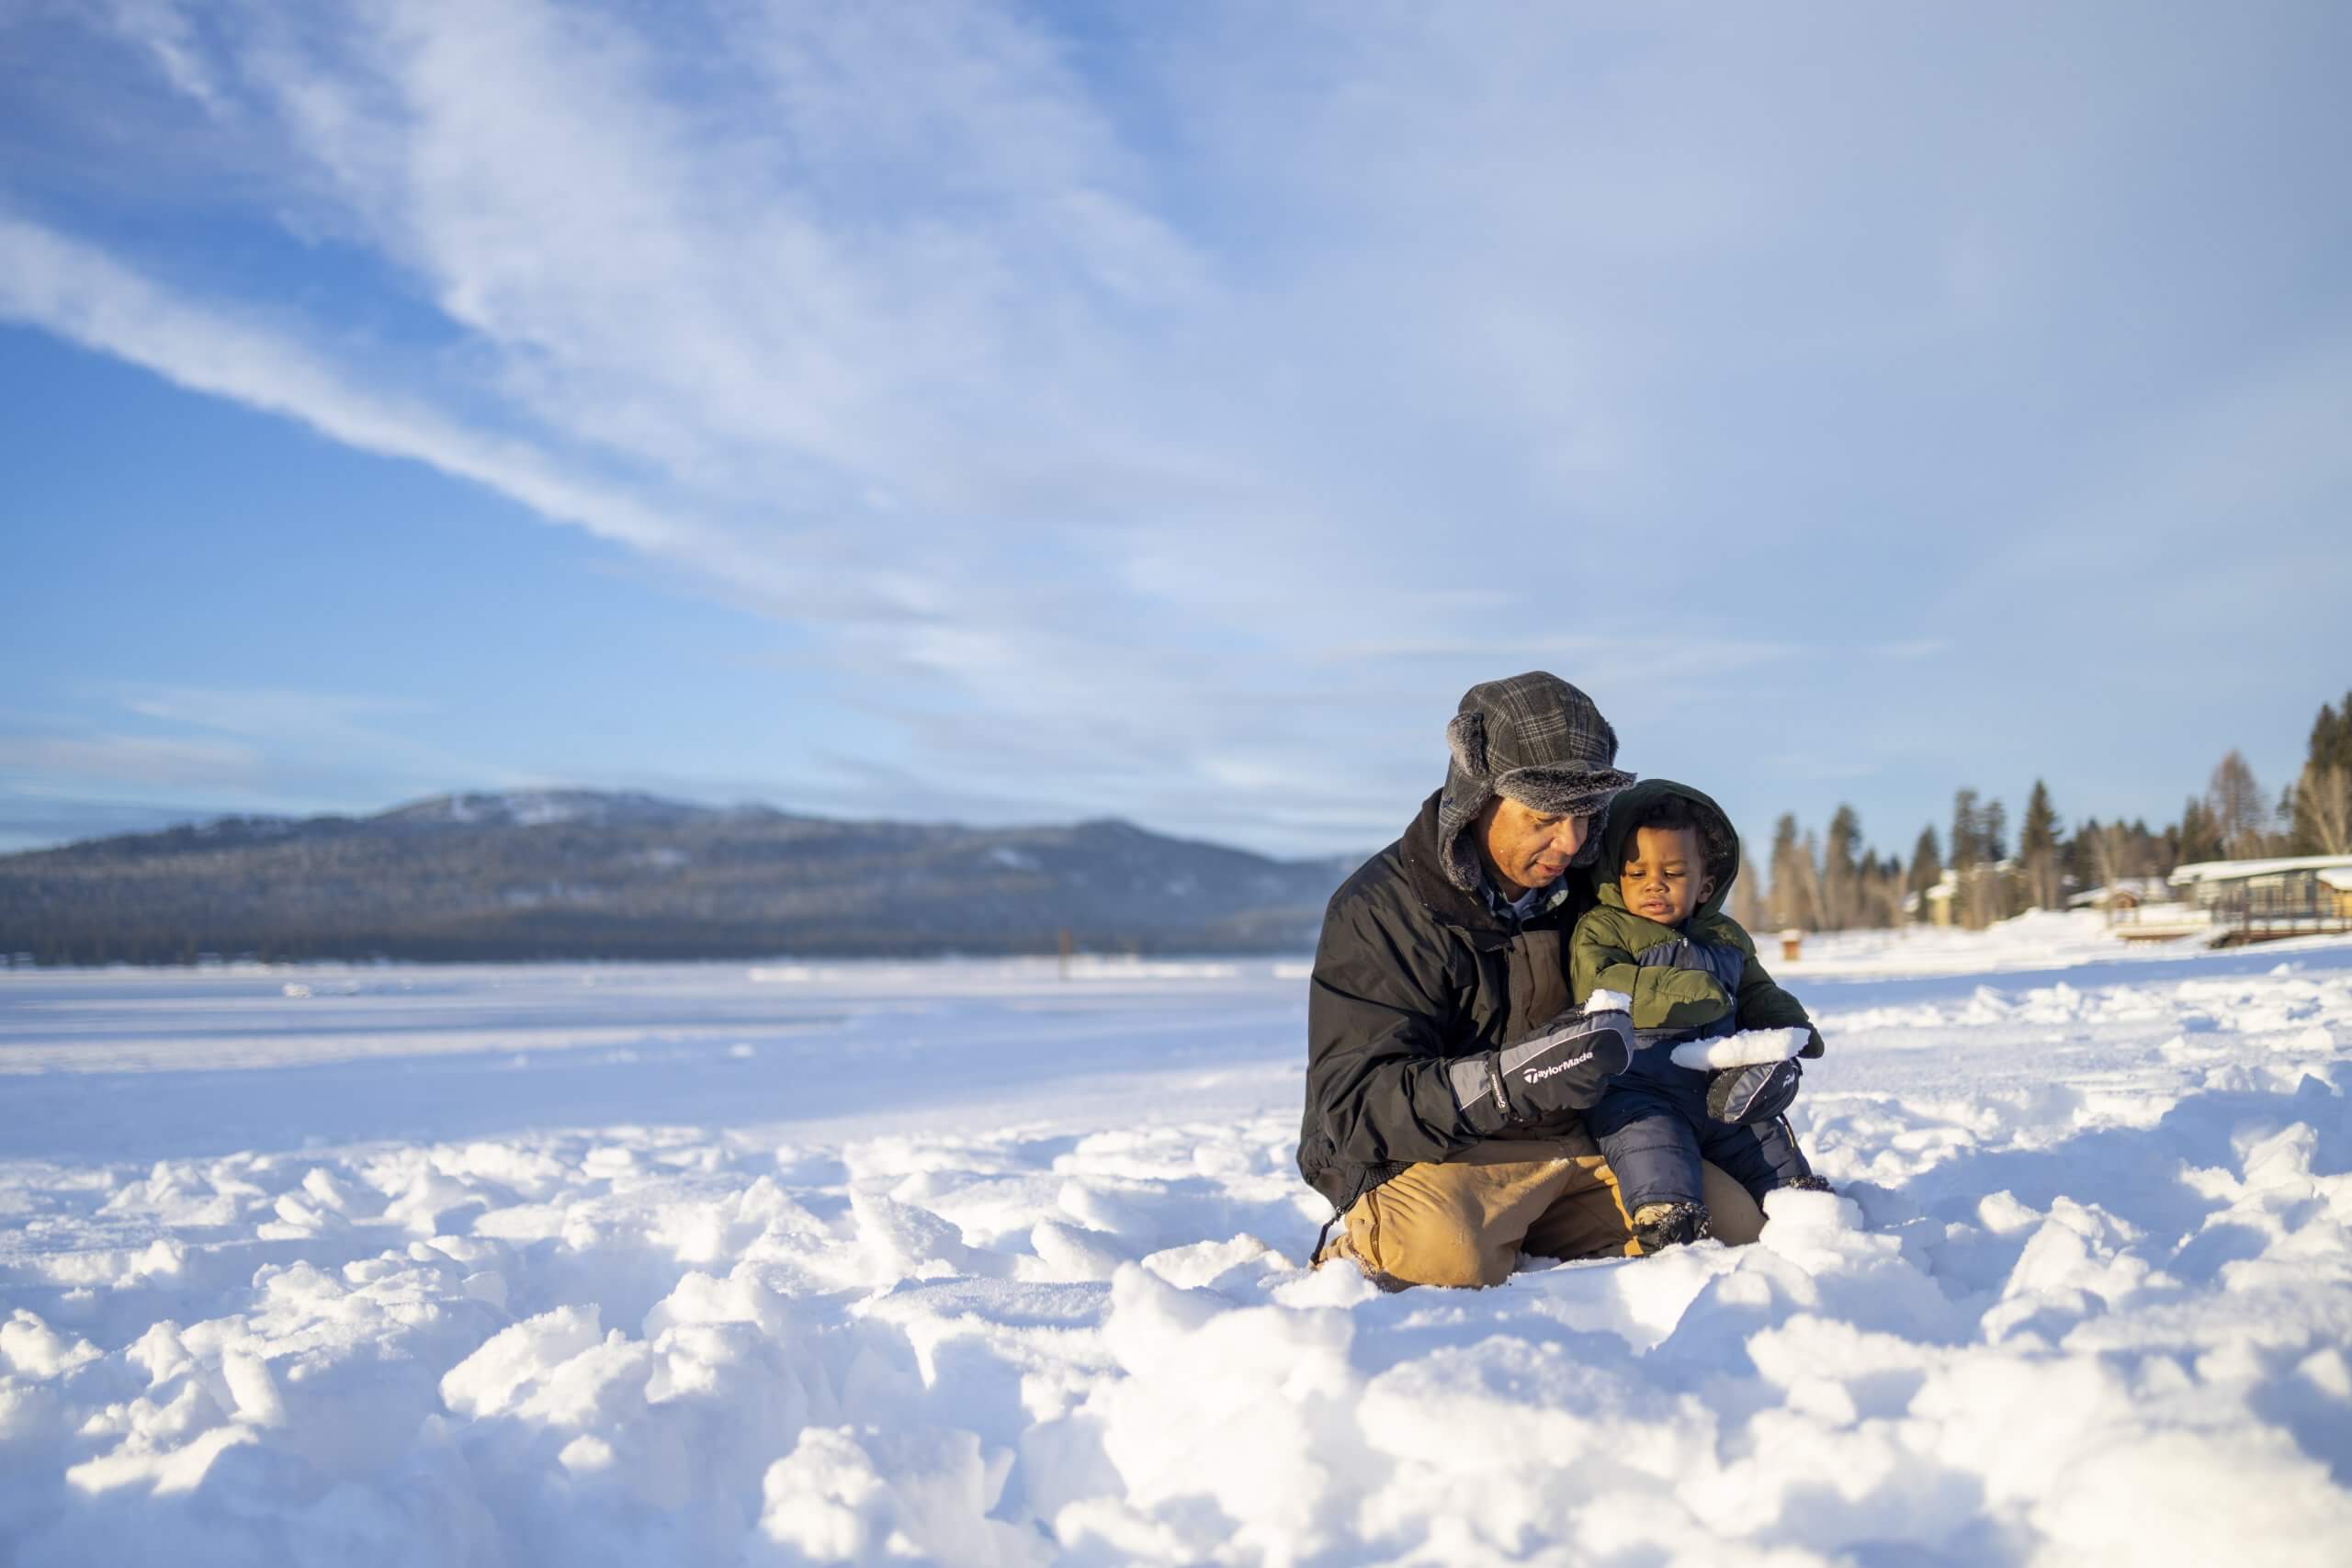 A parent and child in snow gear play in the snow on Payette Lake in the winter.